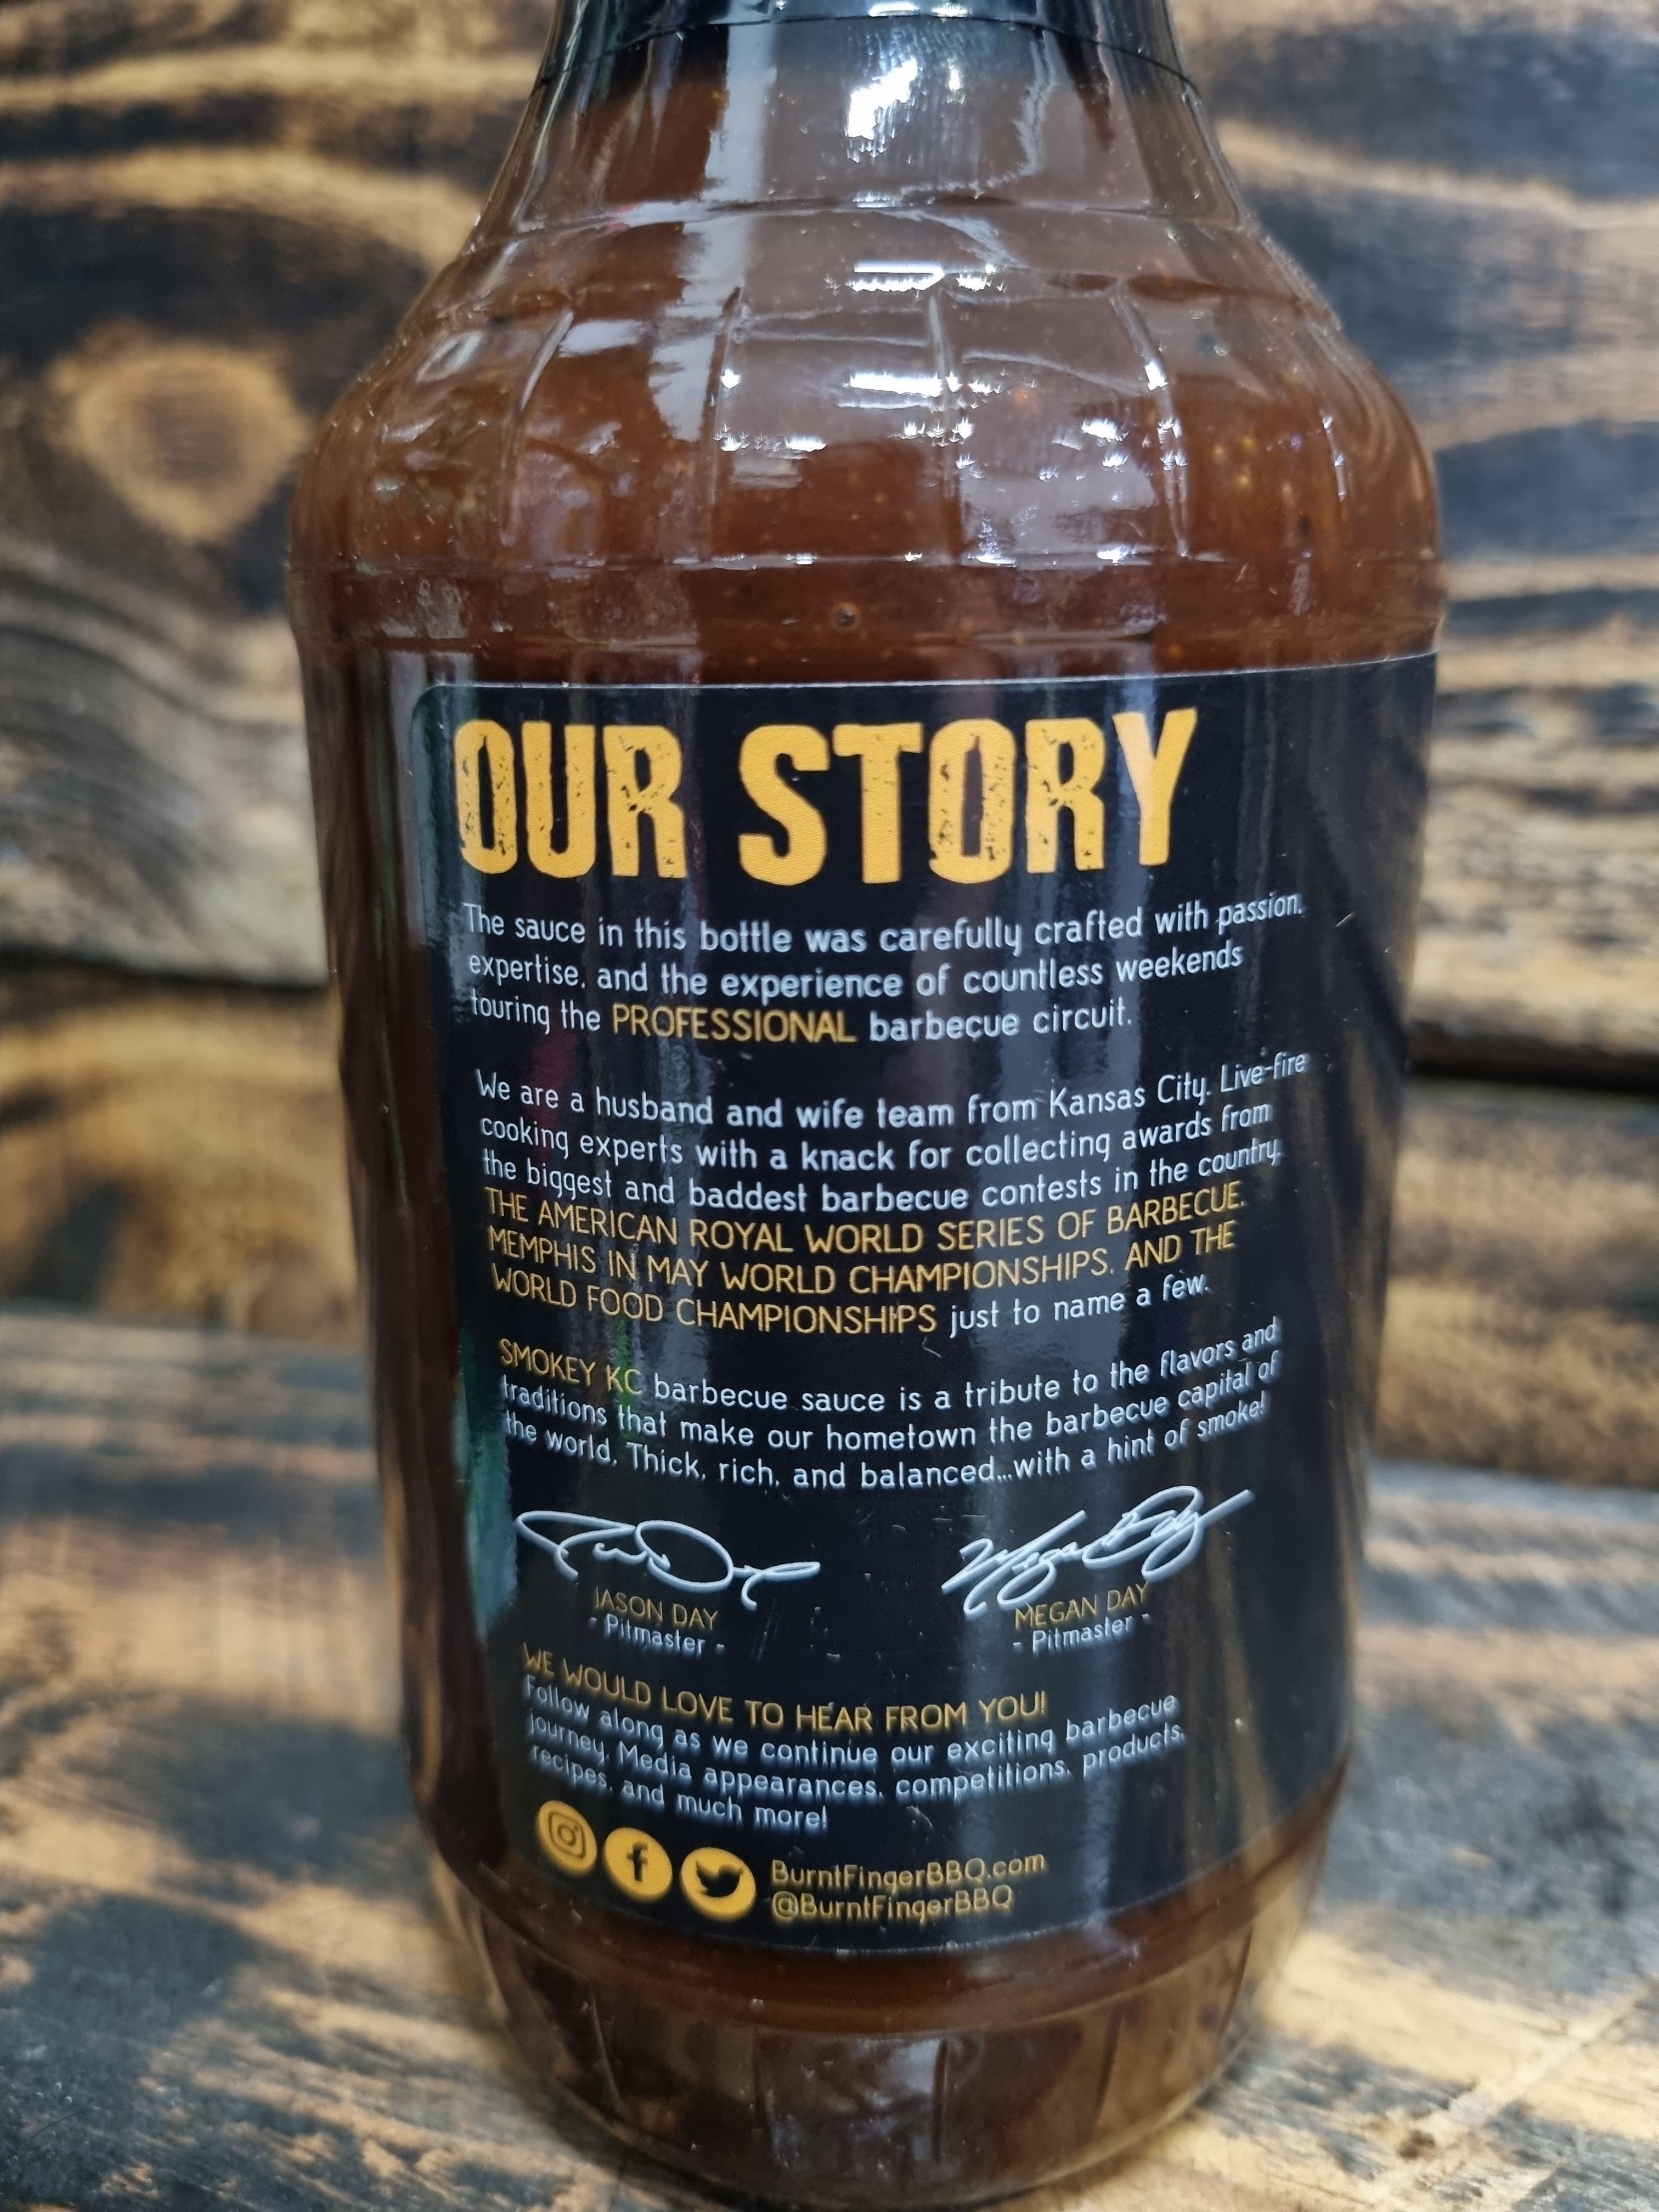 Smokey KC Barbecue Sauce by Burnt Finger BBQ 558g